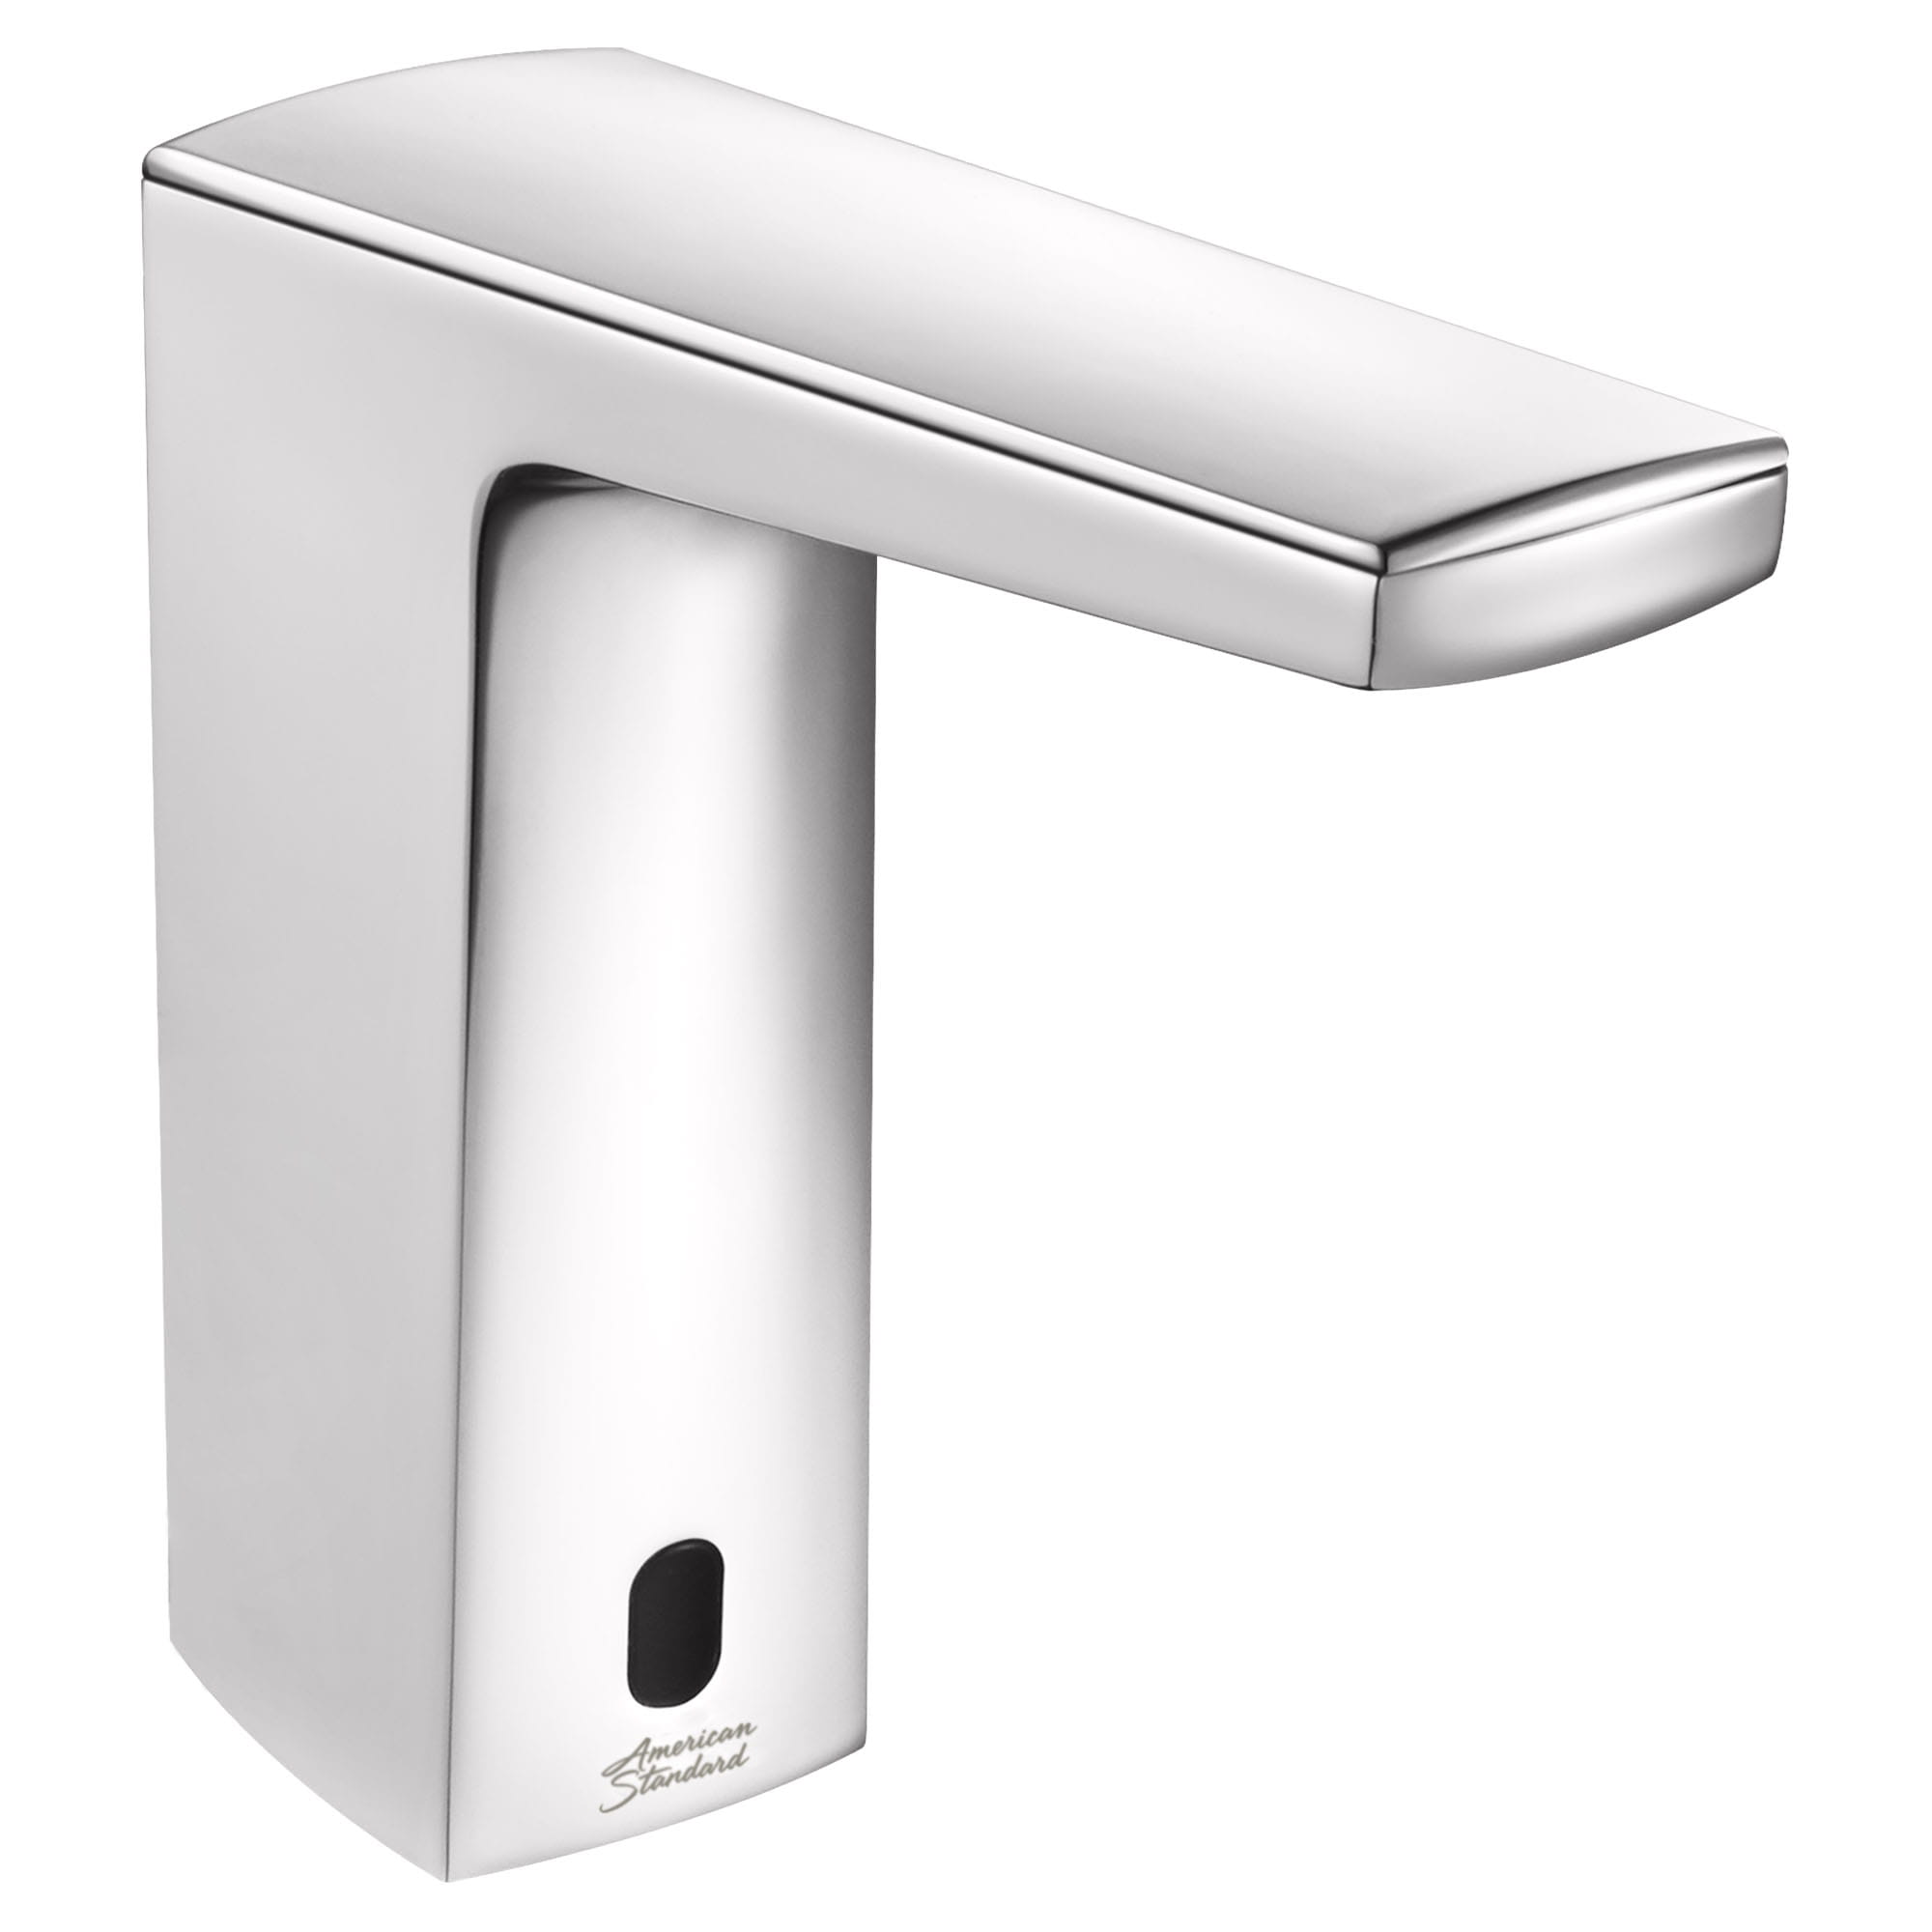 Paradigm® Selectronic® Touchless Faucet, Base Model With SmarTherm Safety Shut-Off + ADM, 1.5 gpm/5.7 Lpm